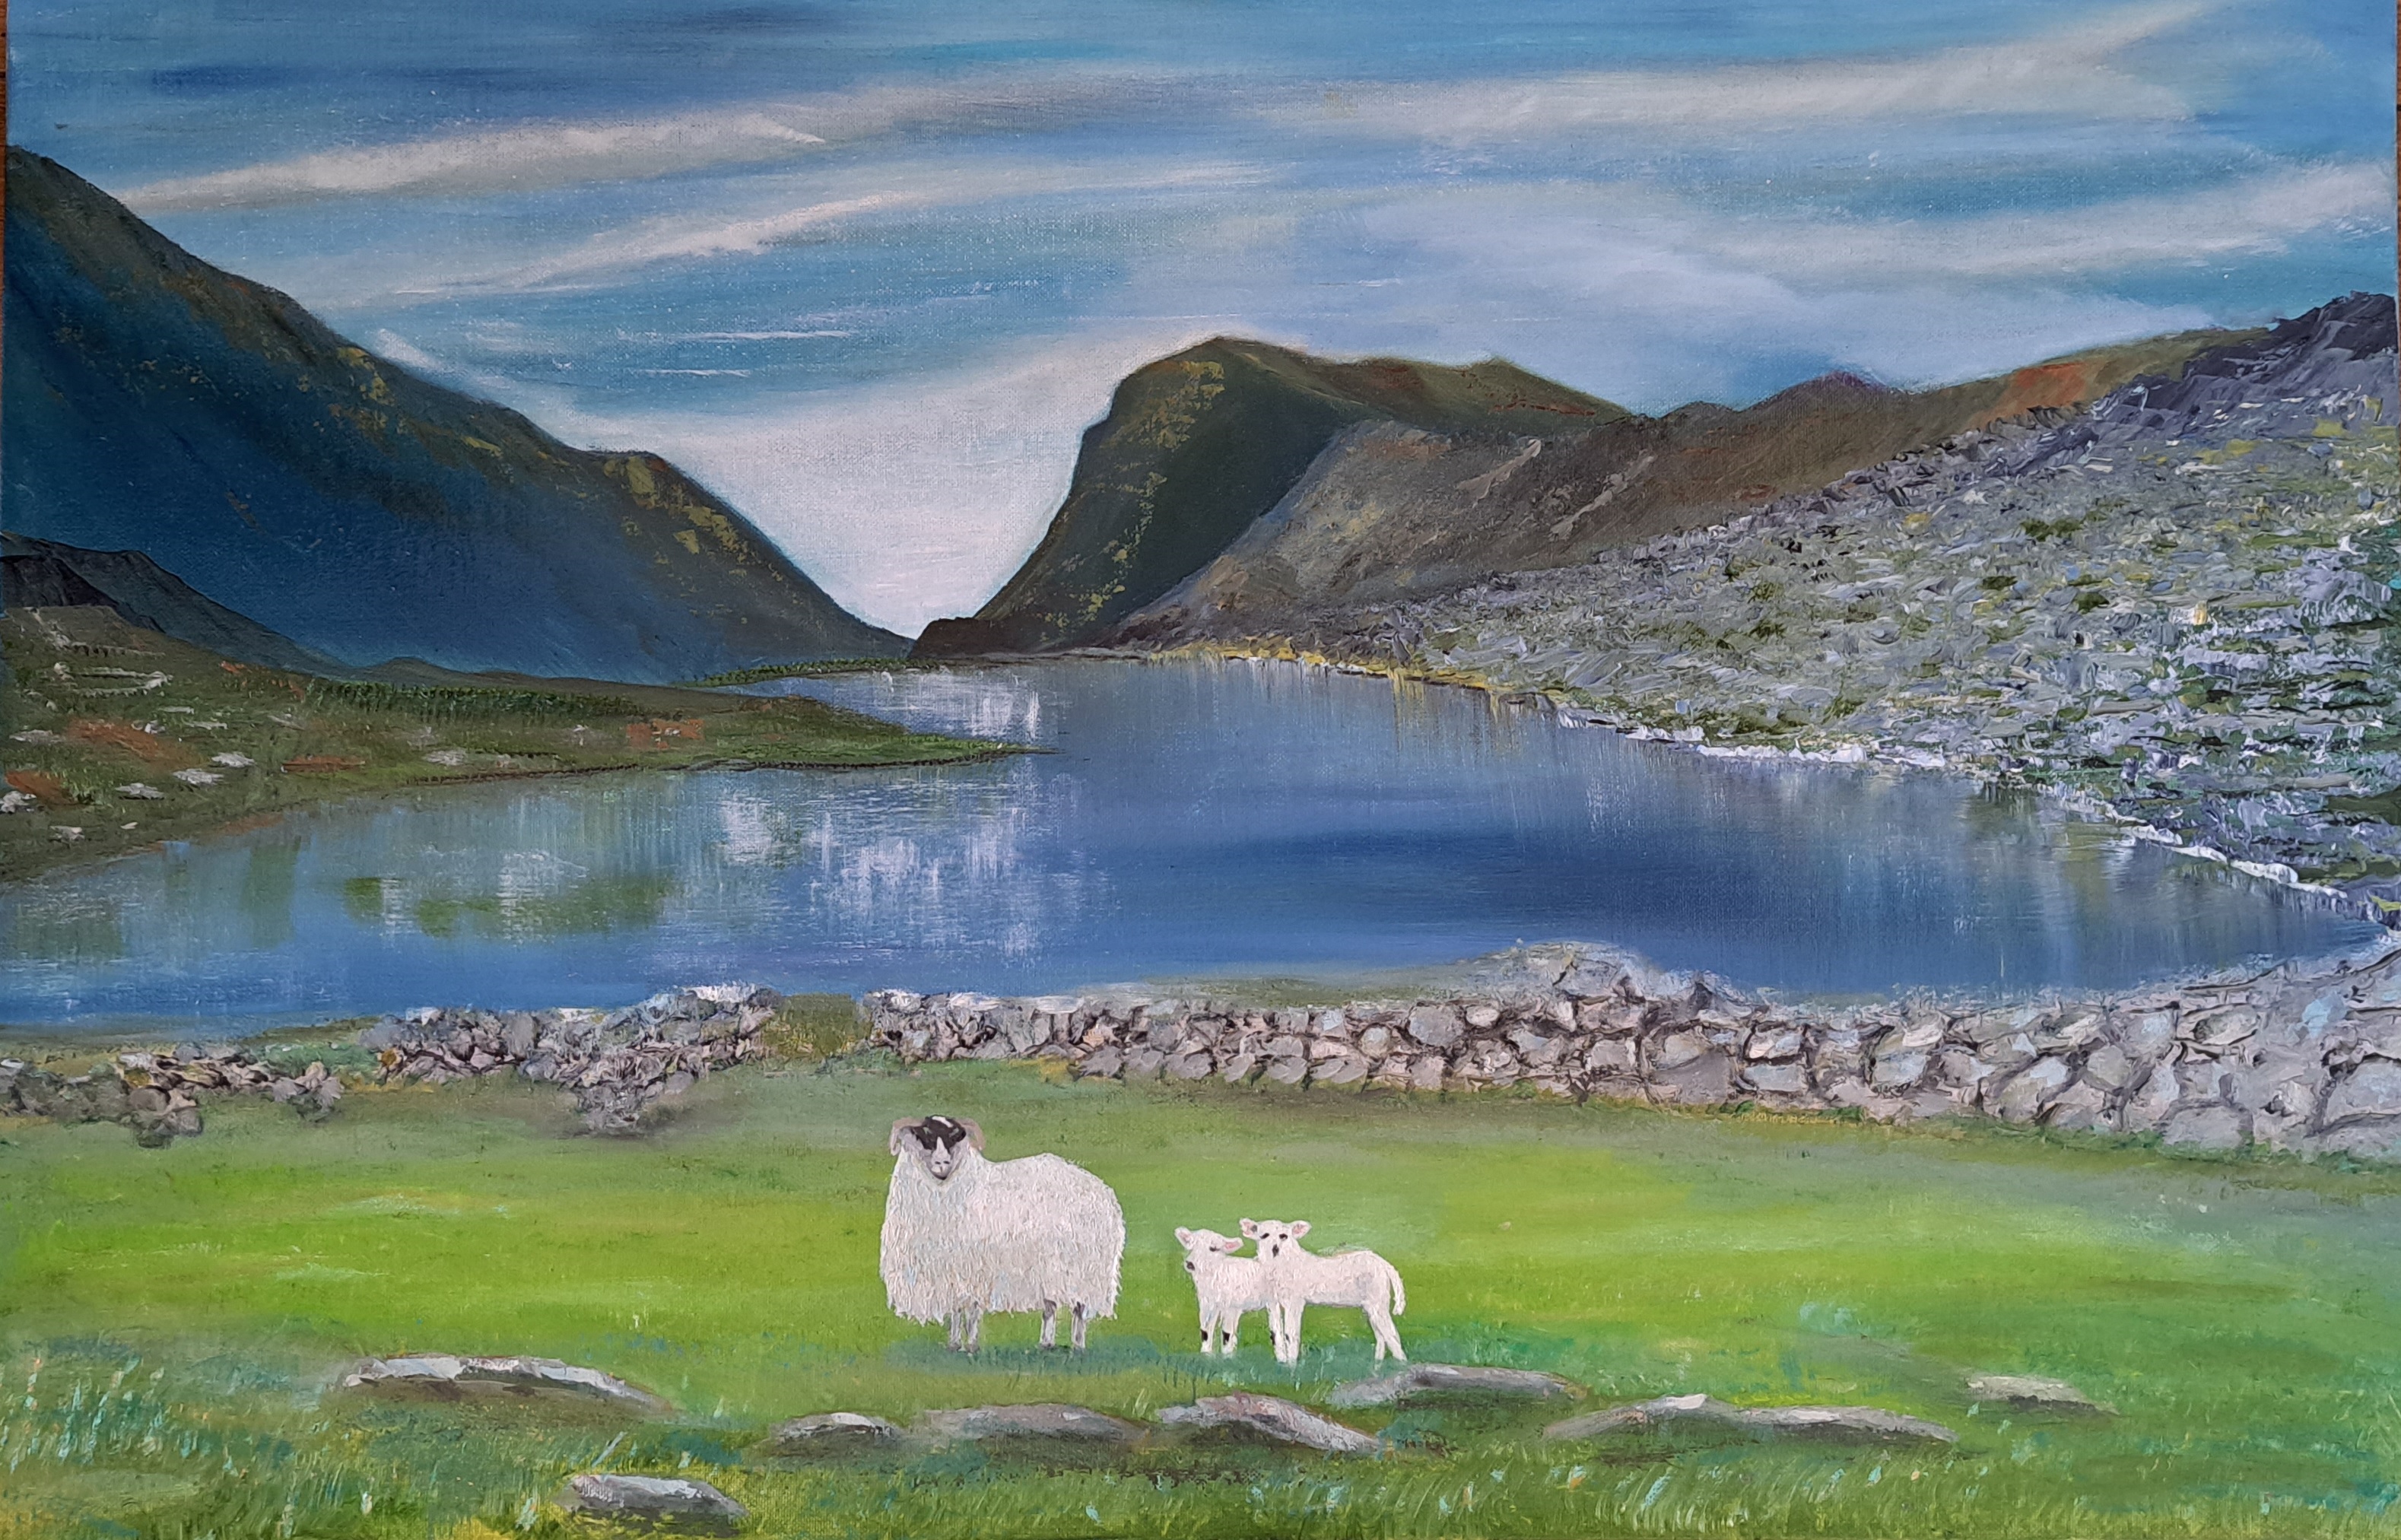 Painting of the Gap of Dunloe in Kerry for sale. A stunning depiction of this iconic Irish landscape